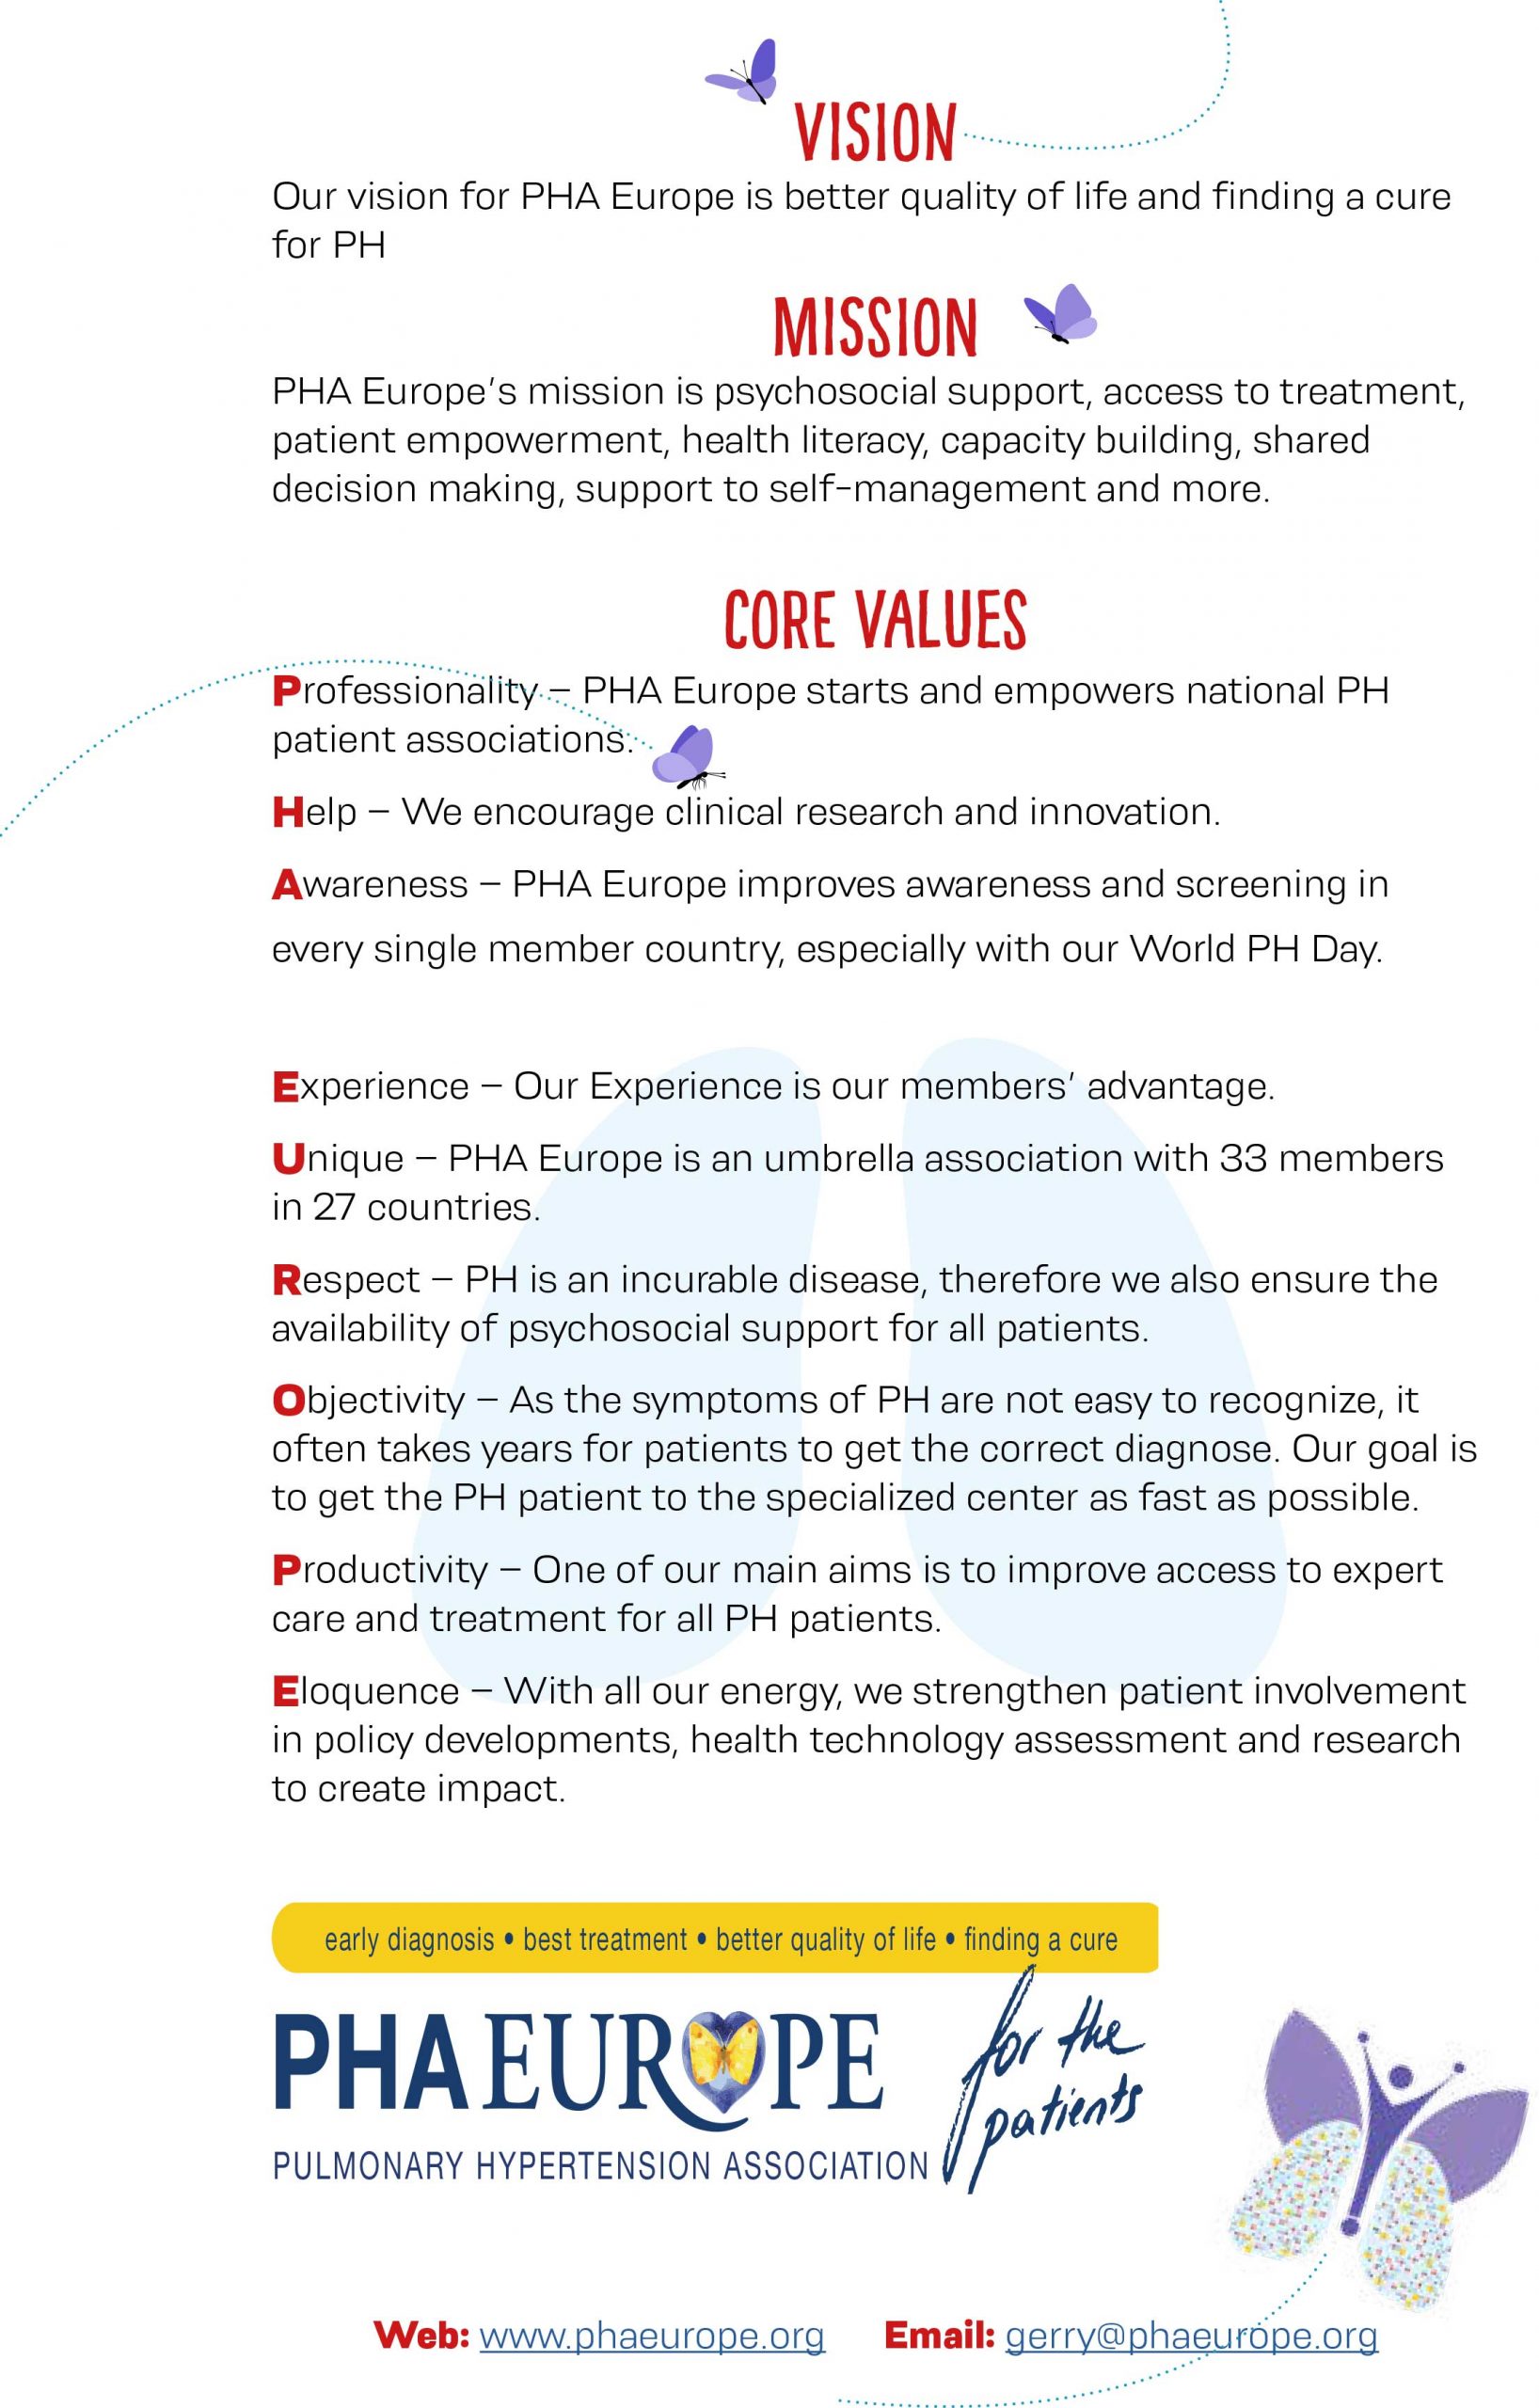 PHA Europe - Vision, Mission, Core values